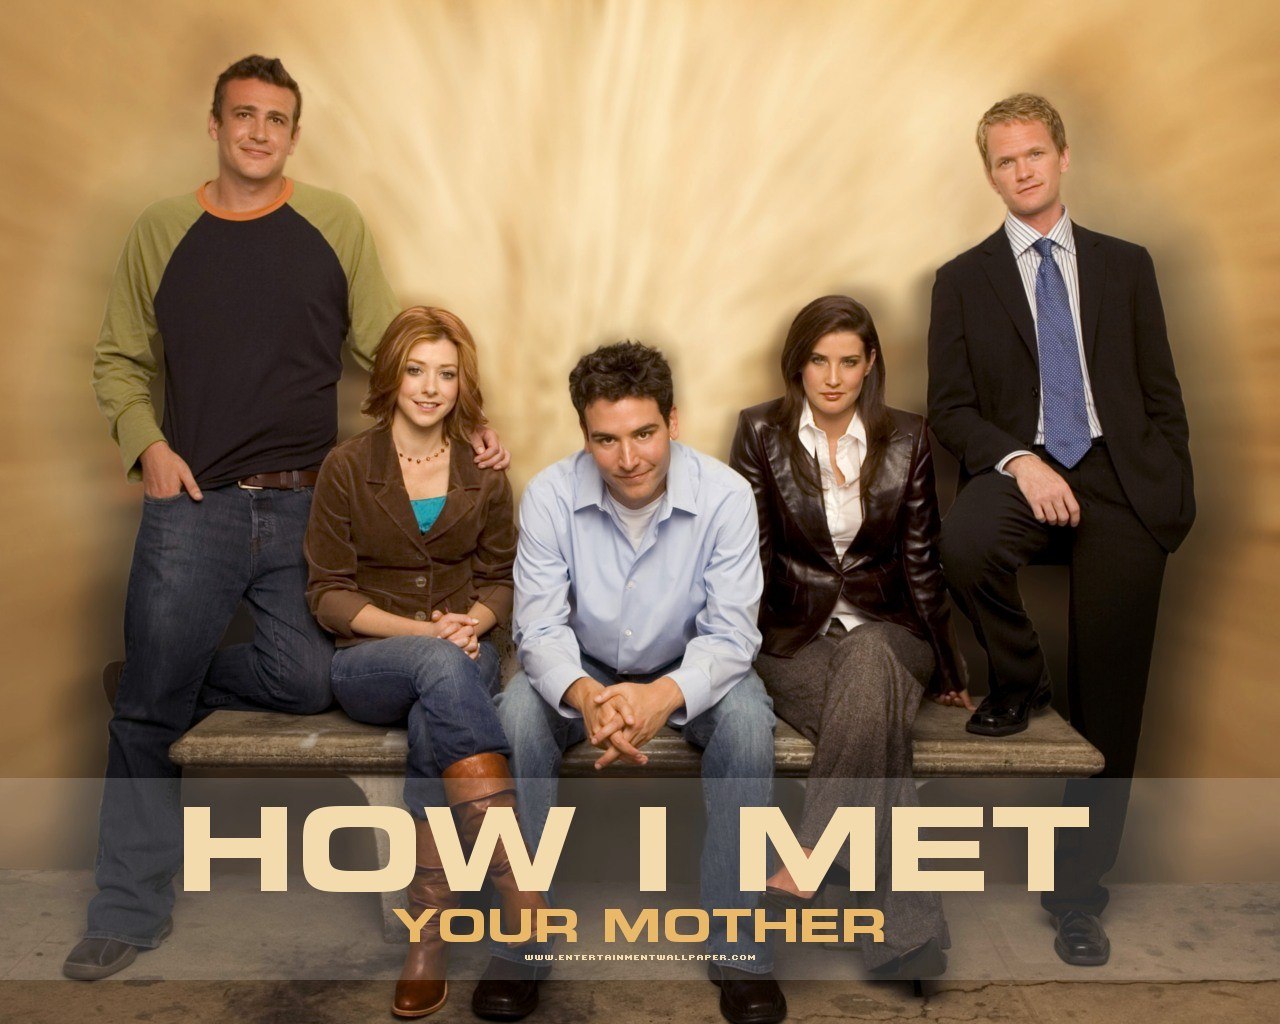 7 Life Lessons I’ve Learned From How I Met Your Mother